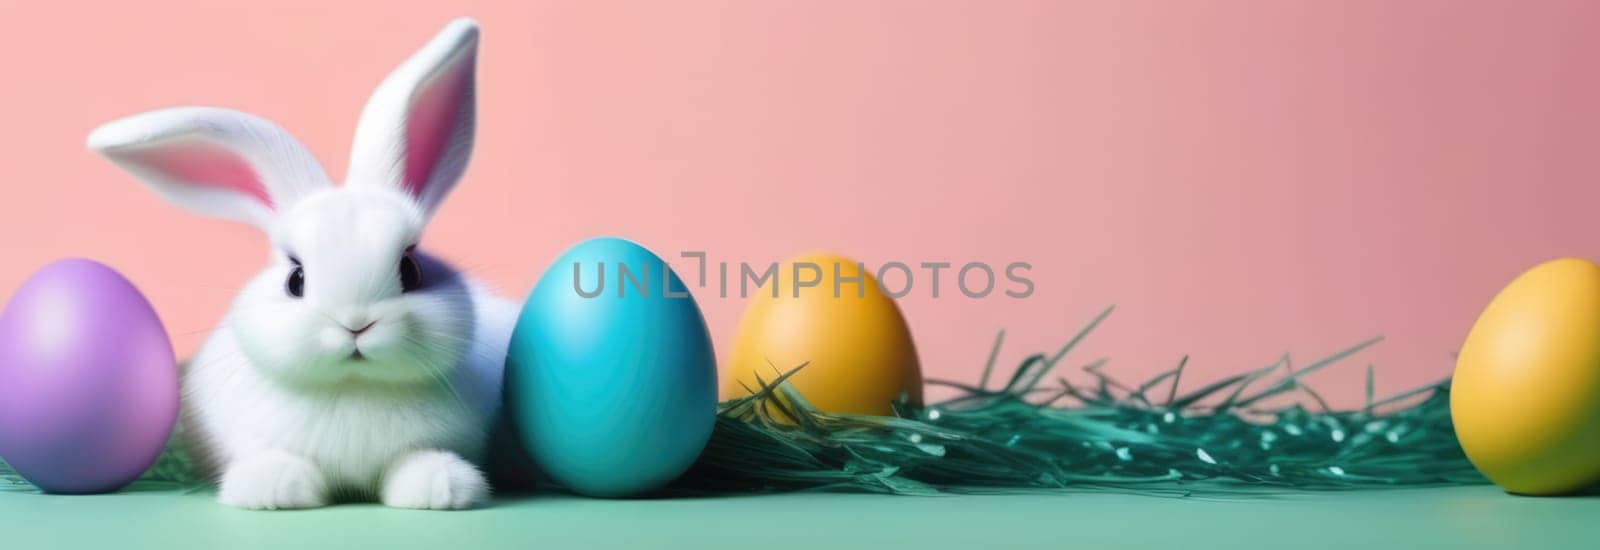 Easter banner with cute Easter bunny hatching from pastel color Easter egg on pastel color background. Illustration of Easter rabbit sitting in cracked eggshell. Happy Easter greeting card. Copy space